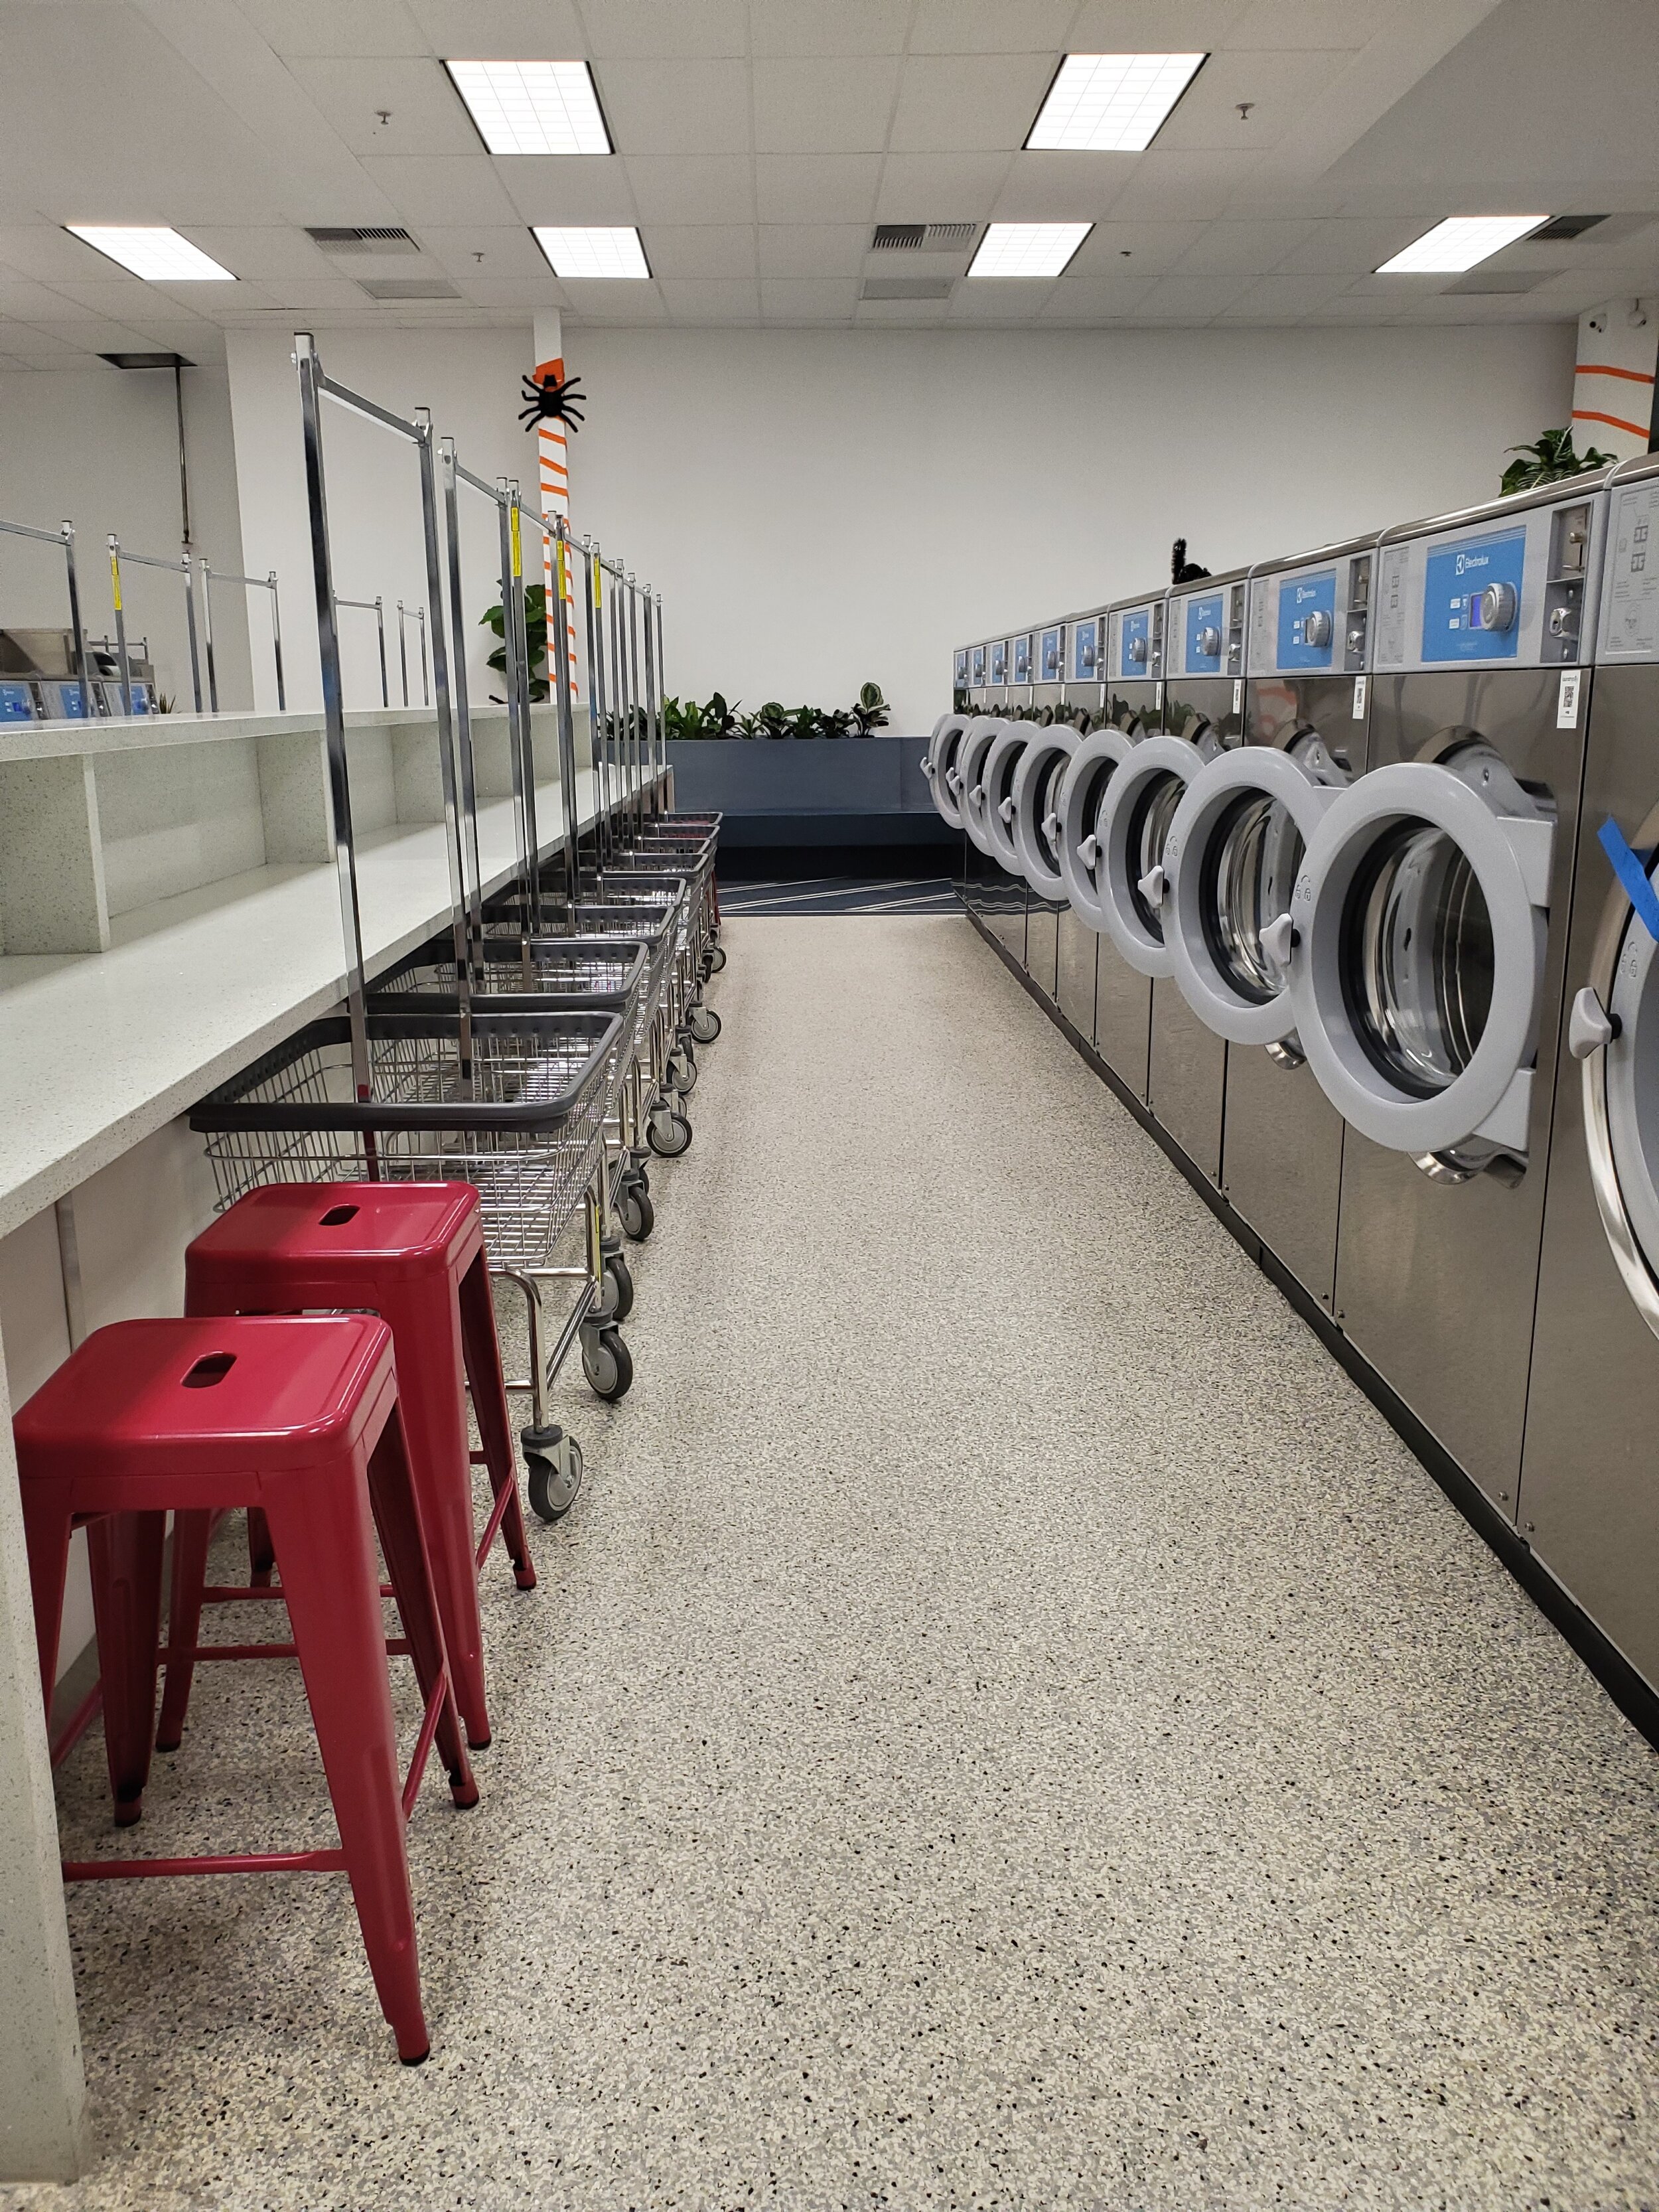 washers and folding tables